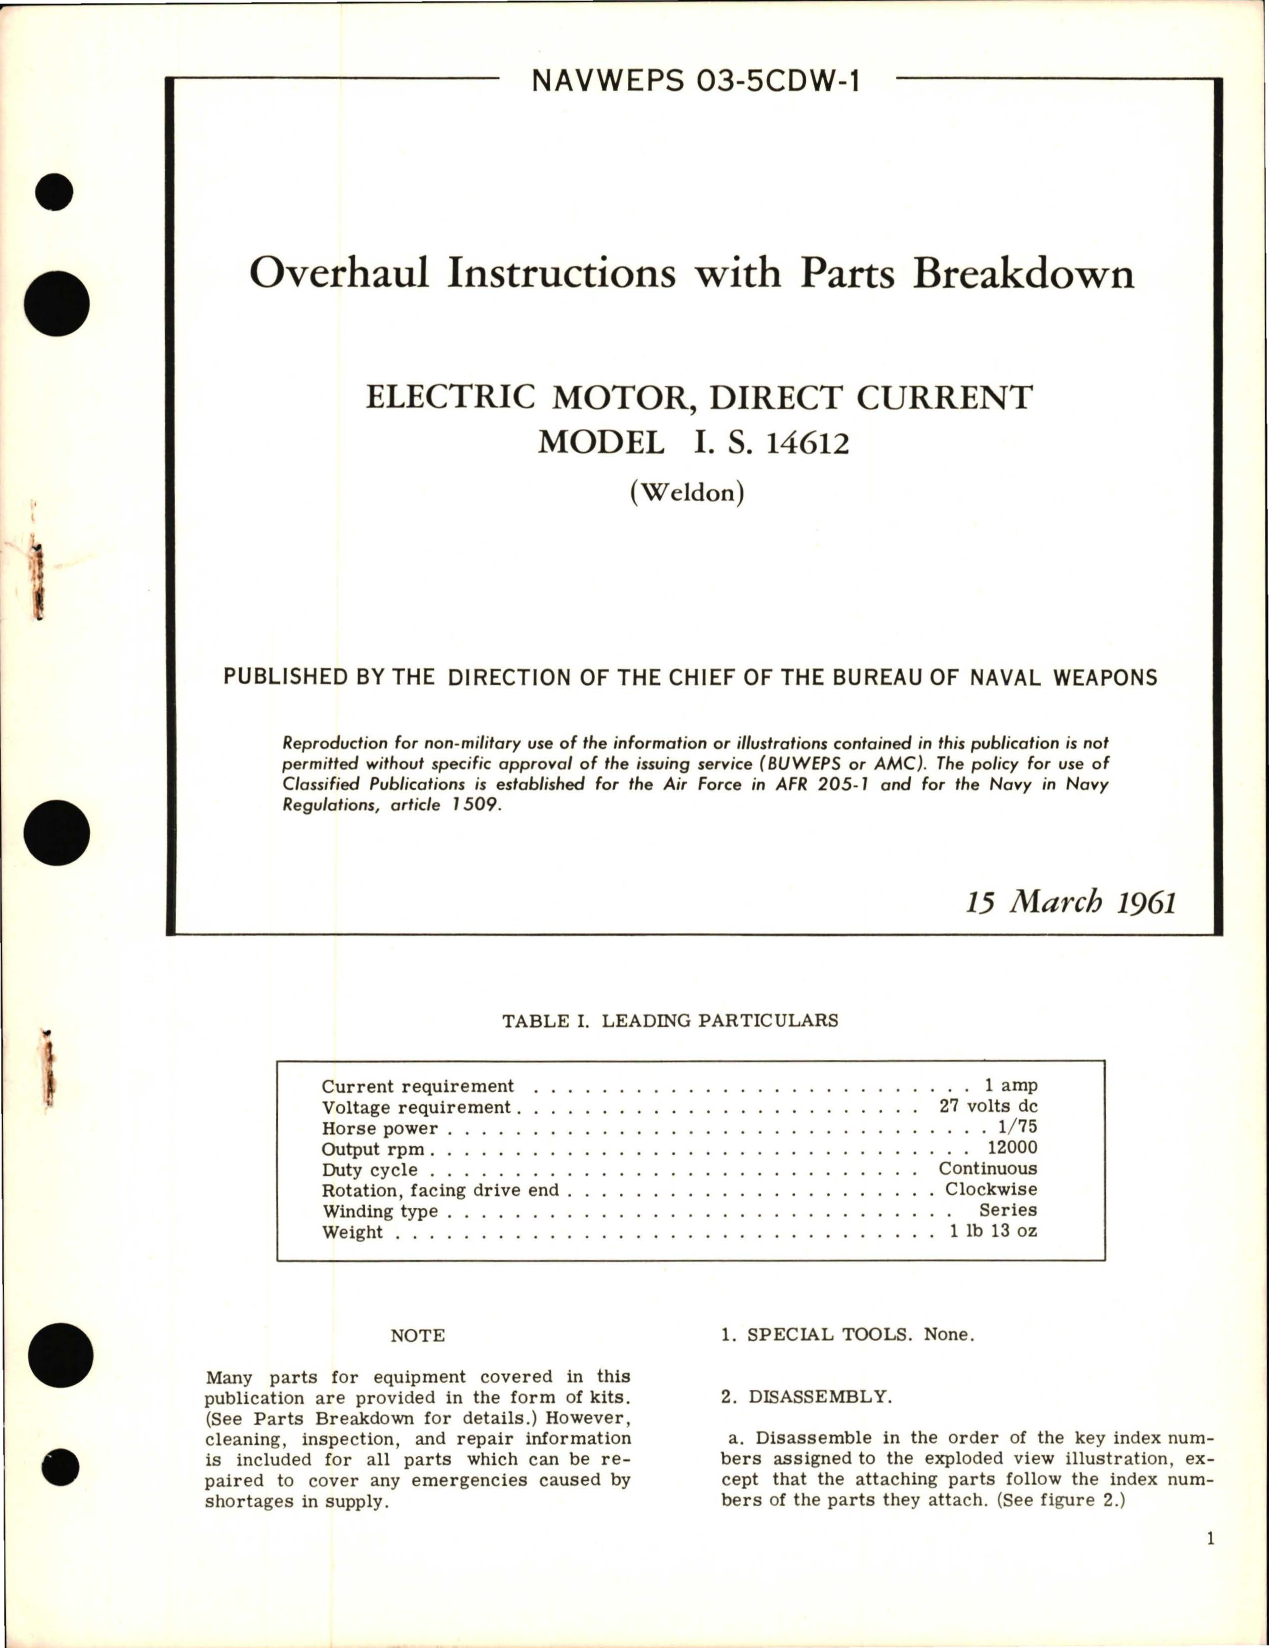 Sample page 1 from AirCorps Library document: Overhaul Instructions with Parts Breakdown for Electric Motor, Direct Current Model I.S. 14612